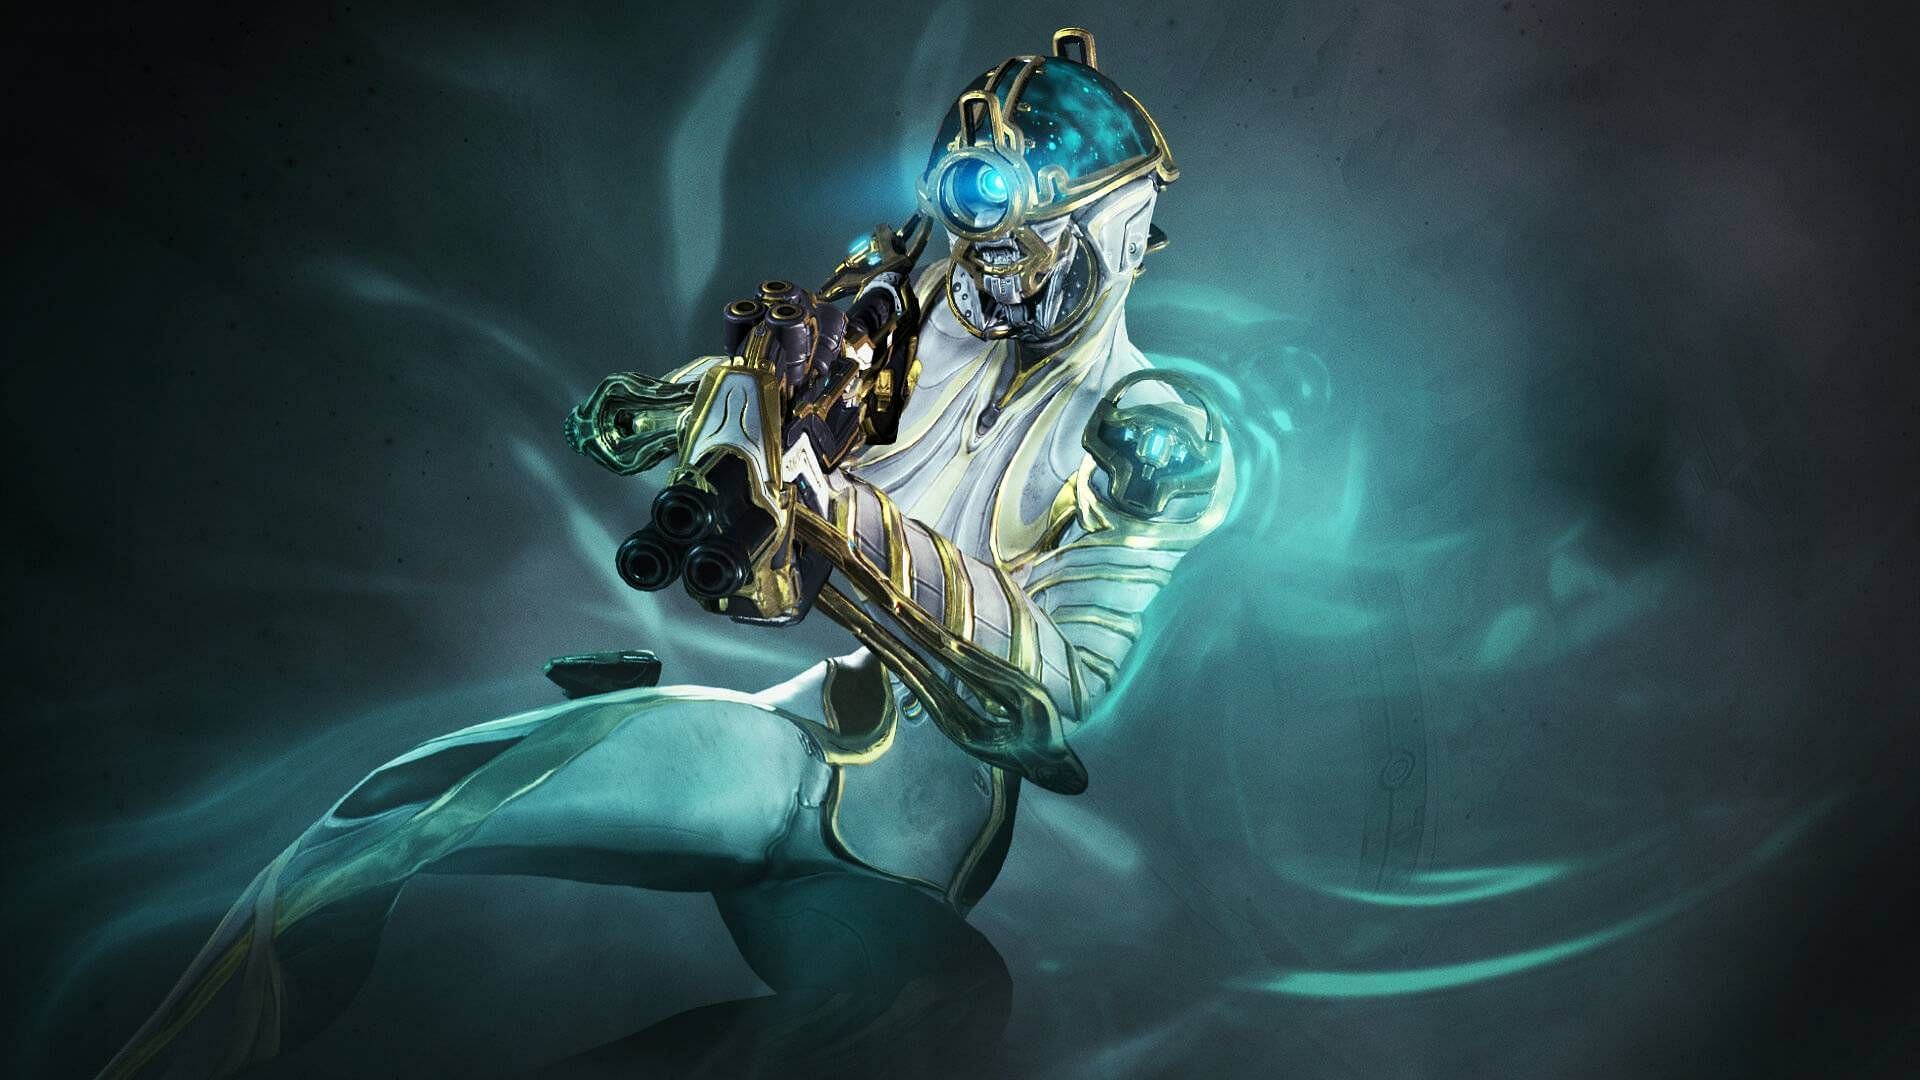 Image of the Mag Prime Warframe holding a Boar Prime